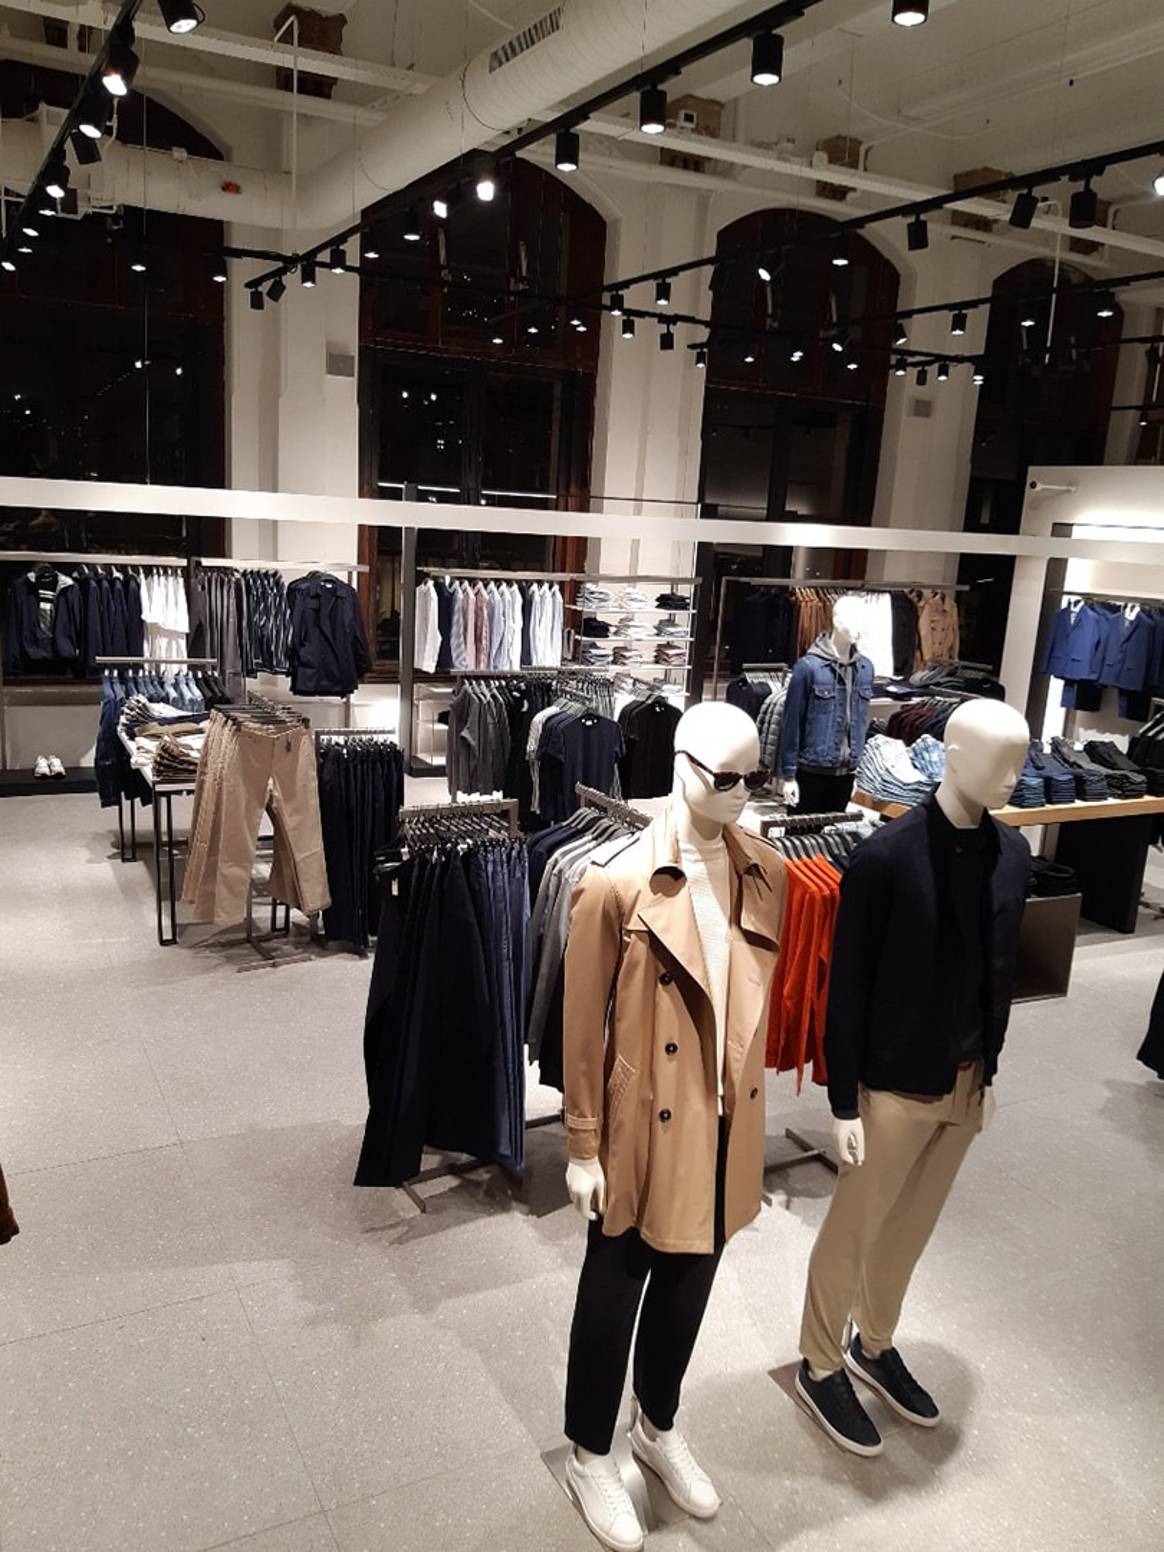 In pictures: Mango opens refurbished and expanded Amsterdam store